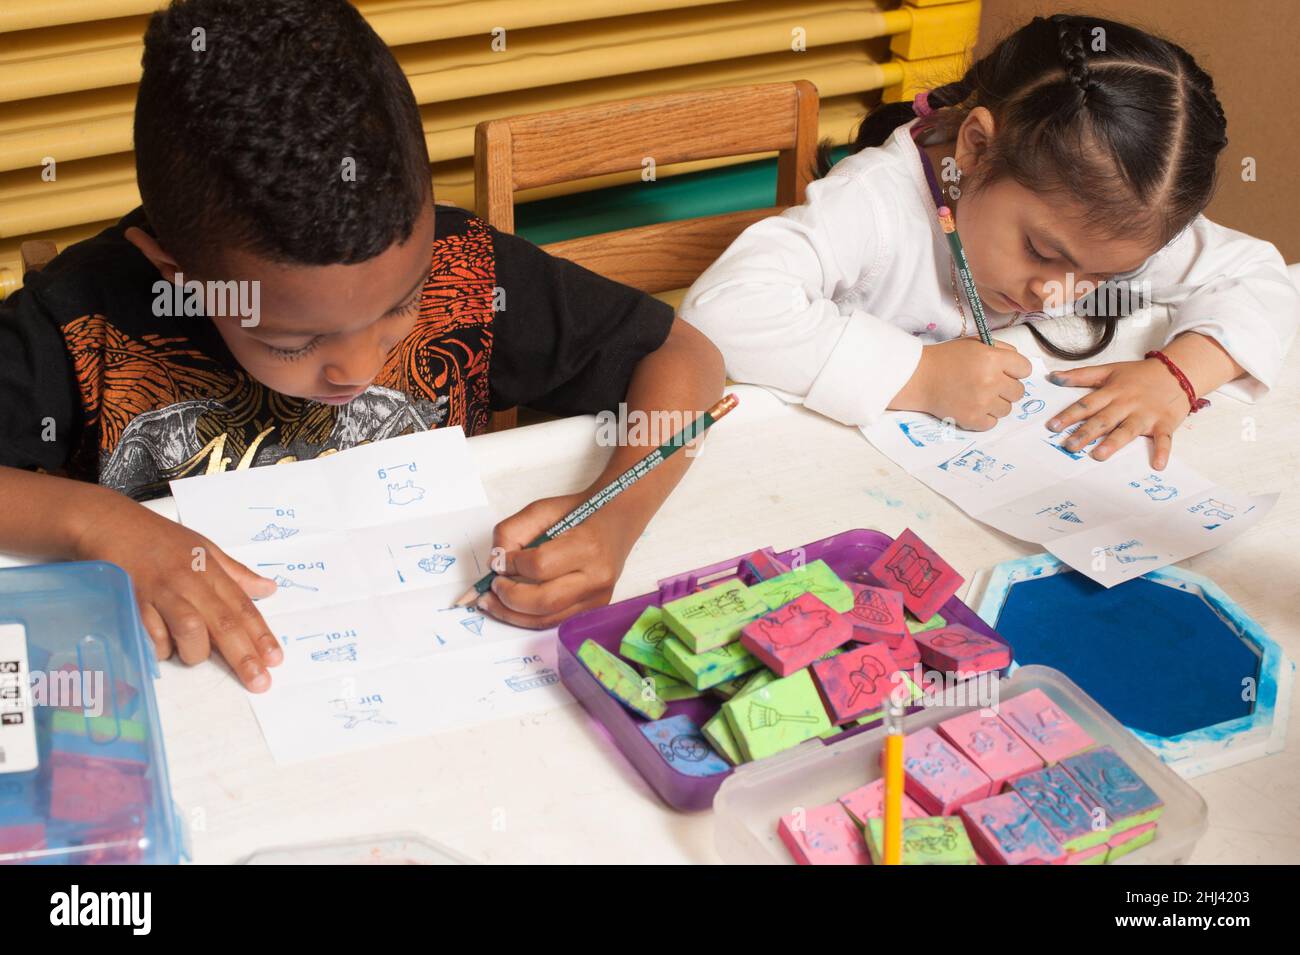 Education Preschool 4 year olds boy and girl sitting side by side writing with pencils using opposite hands Stock Photo